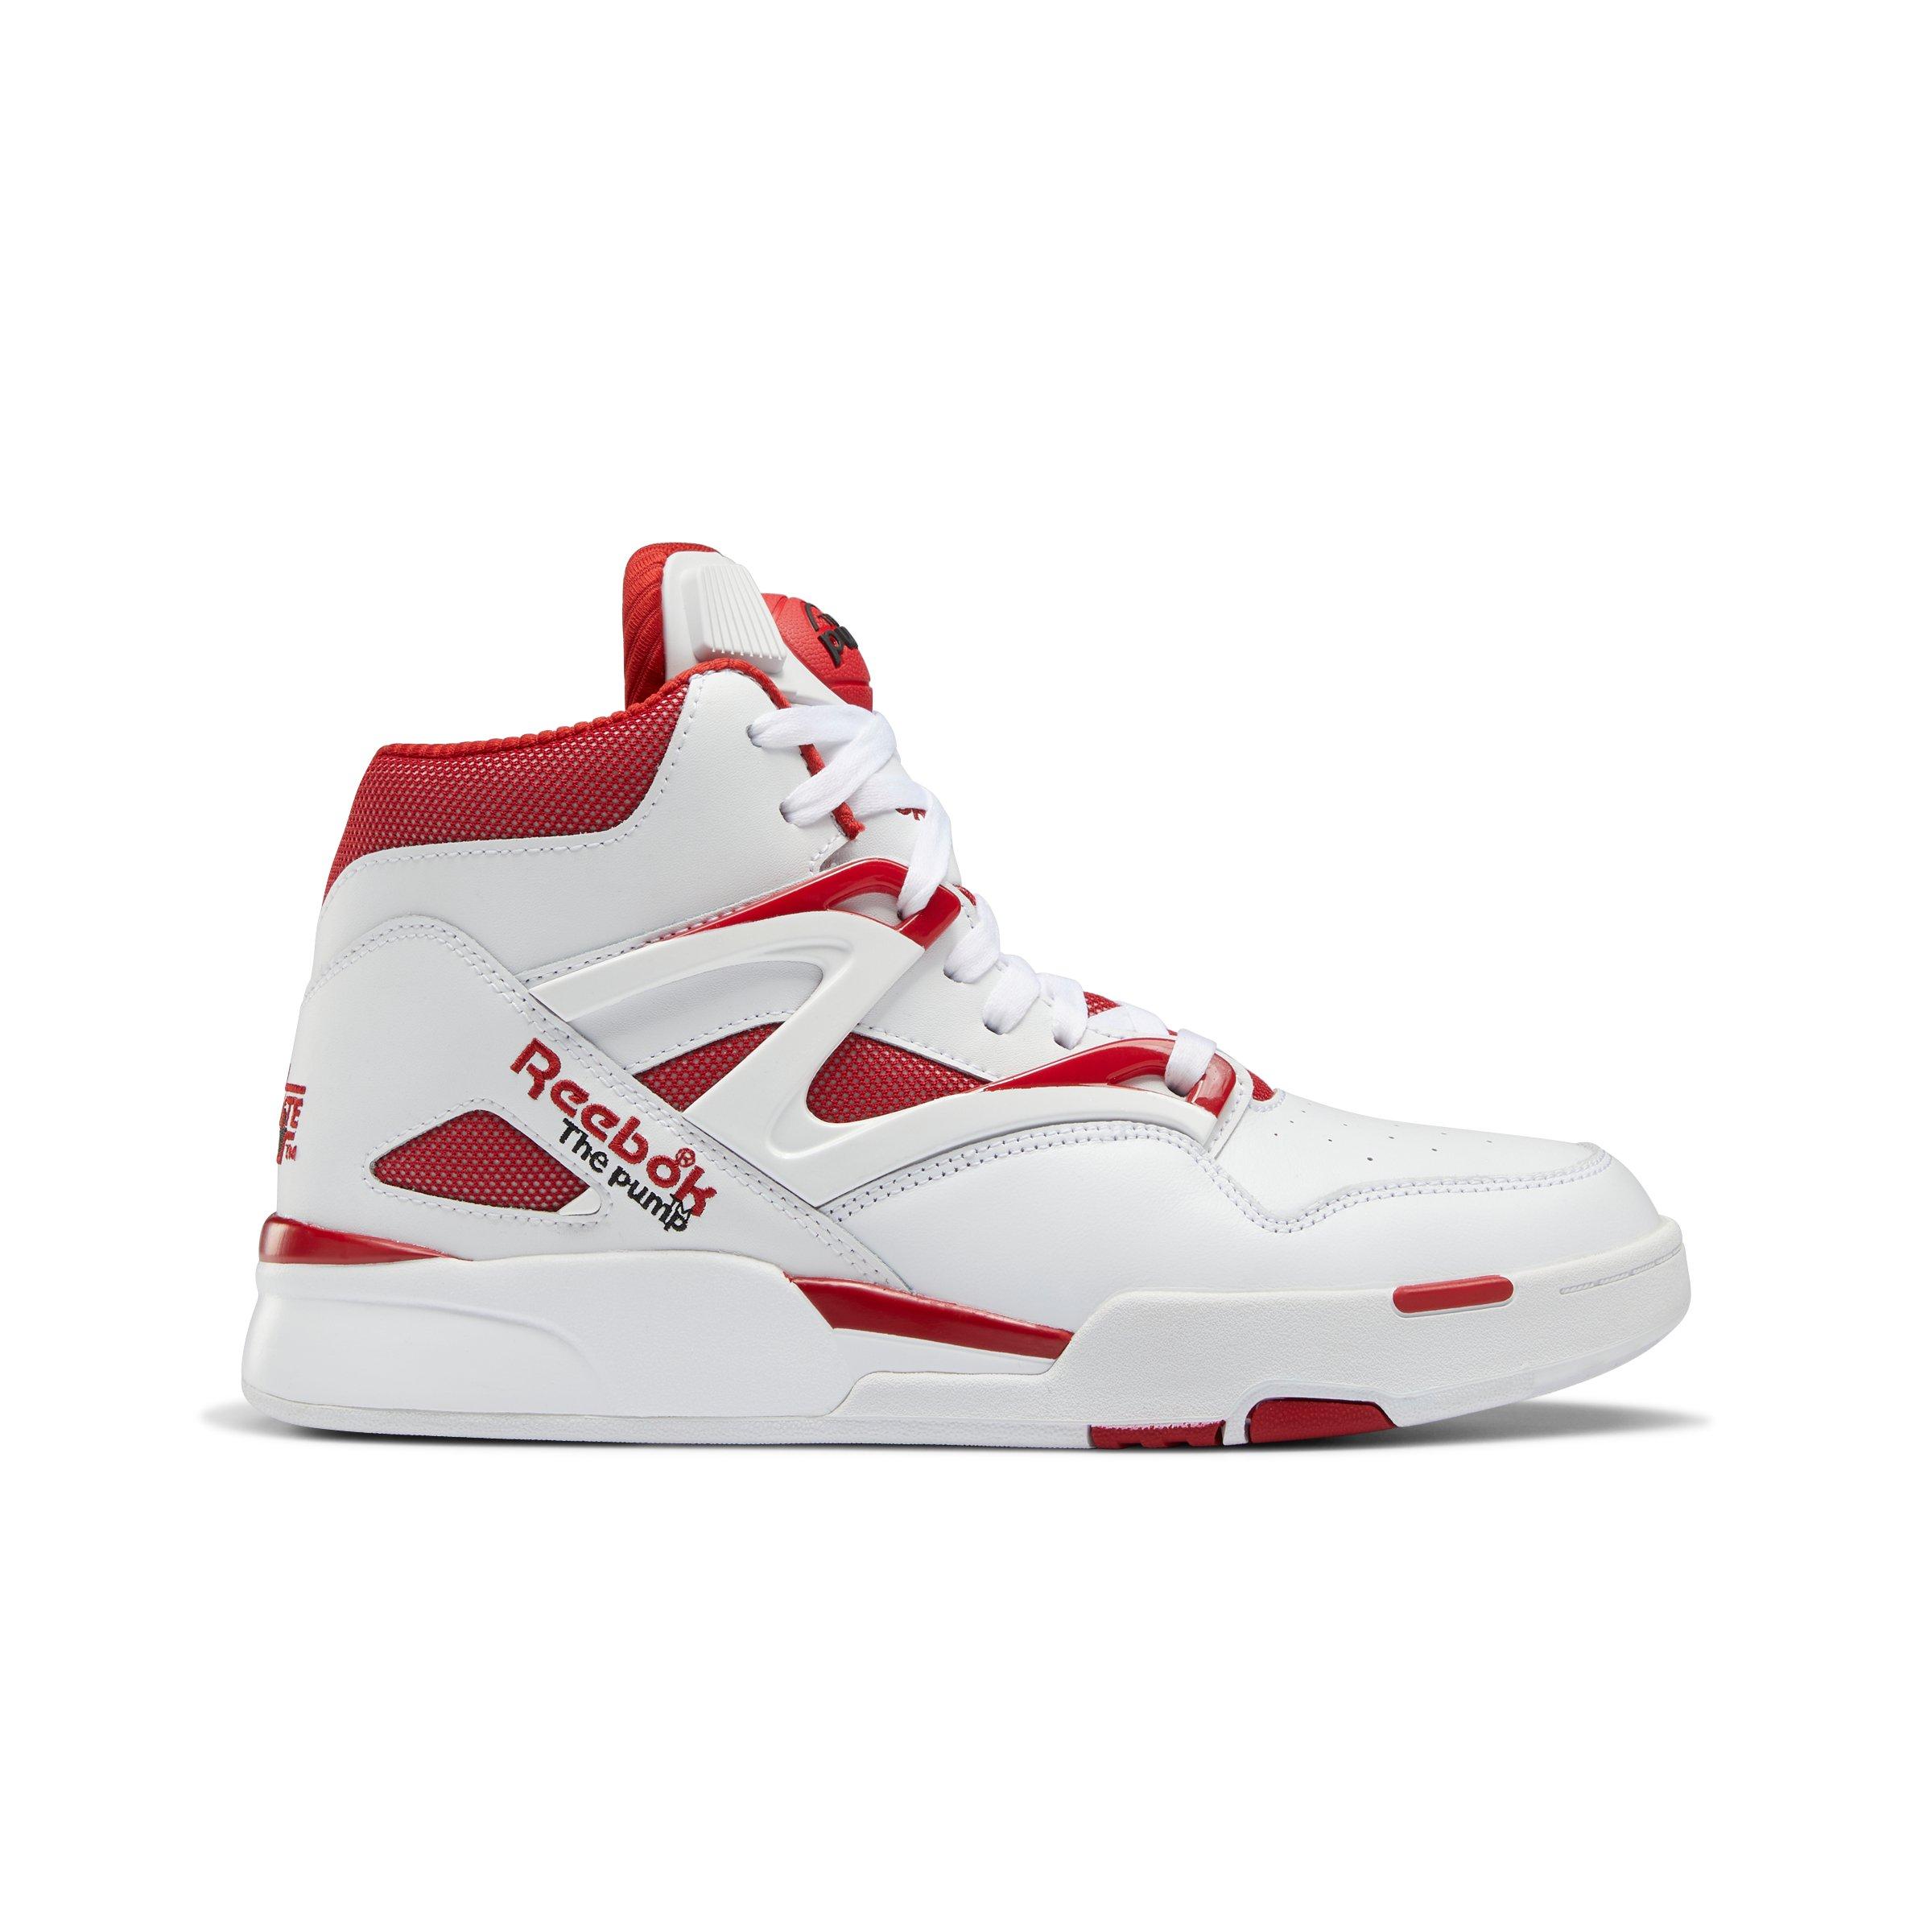 Buy Reebok Pump - All releases at a glance at